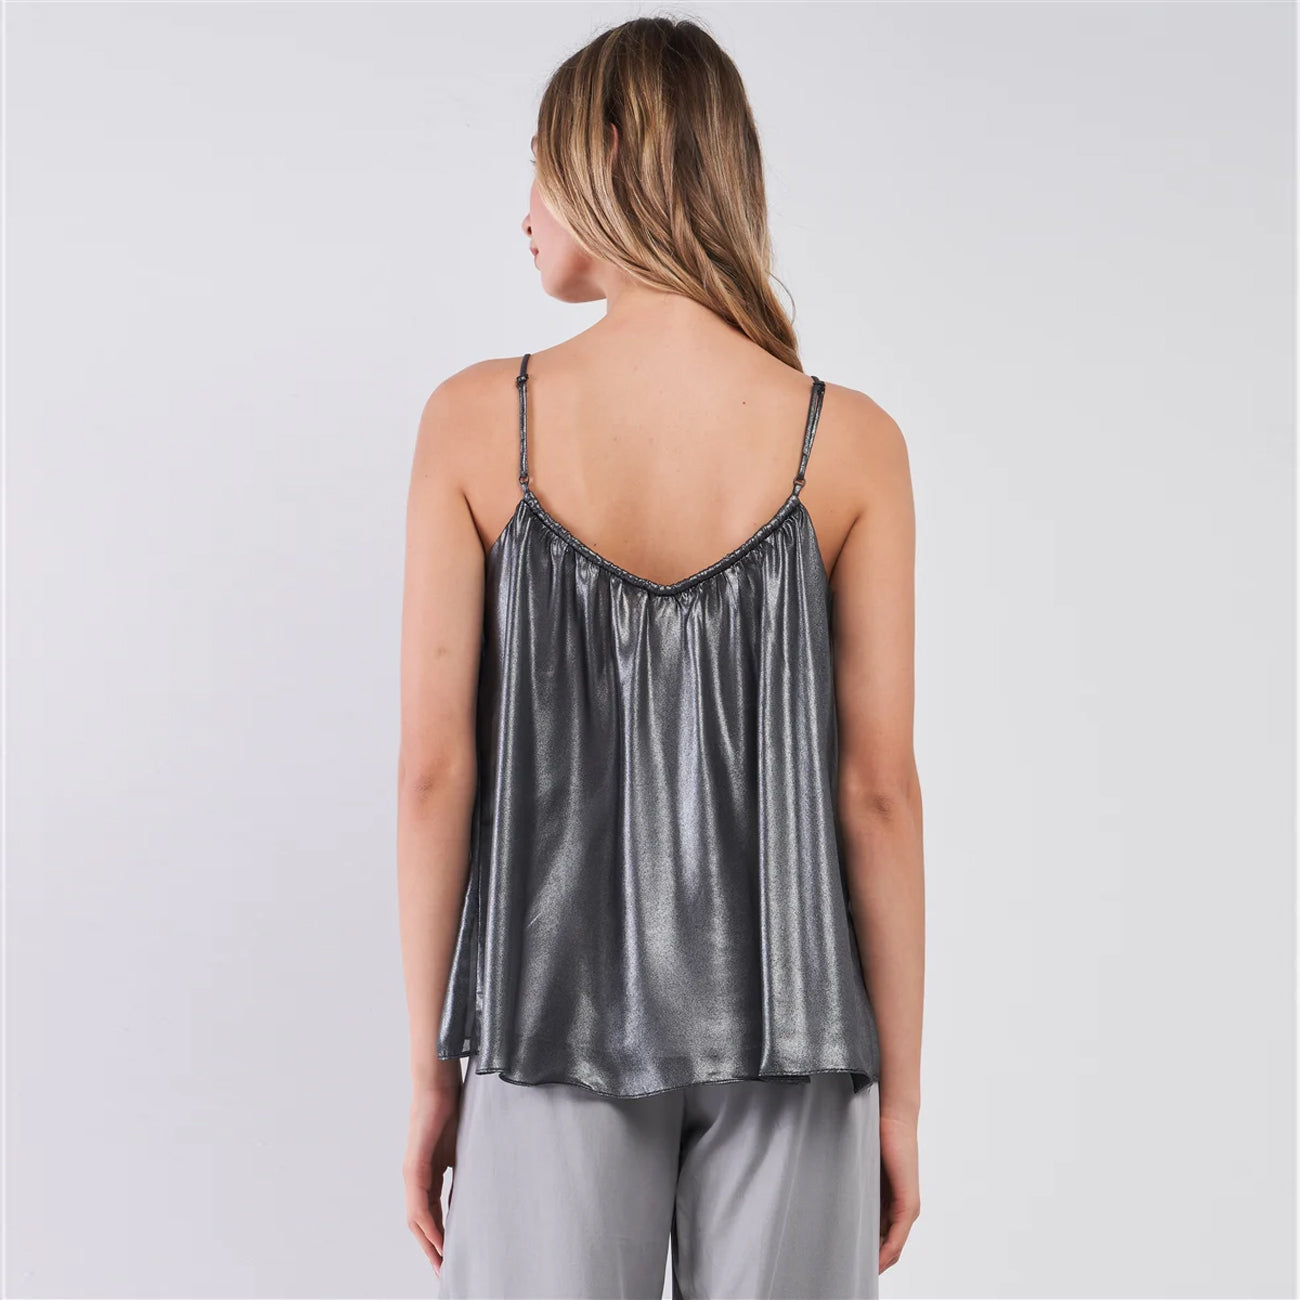 Silver Black V-neck Sleeveless Loose Fit Women's Top